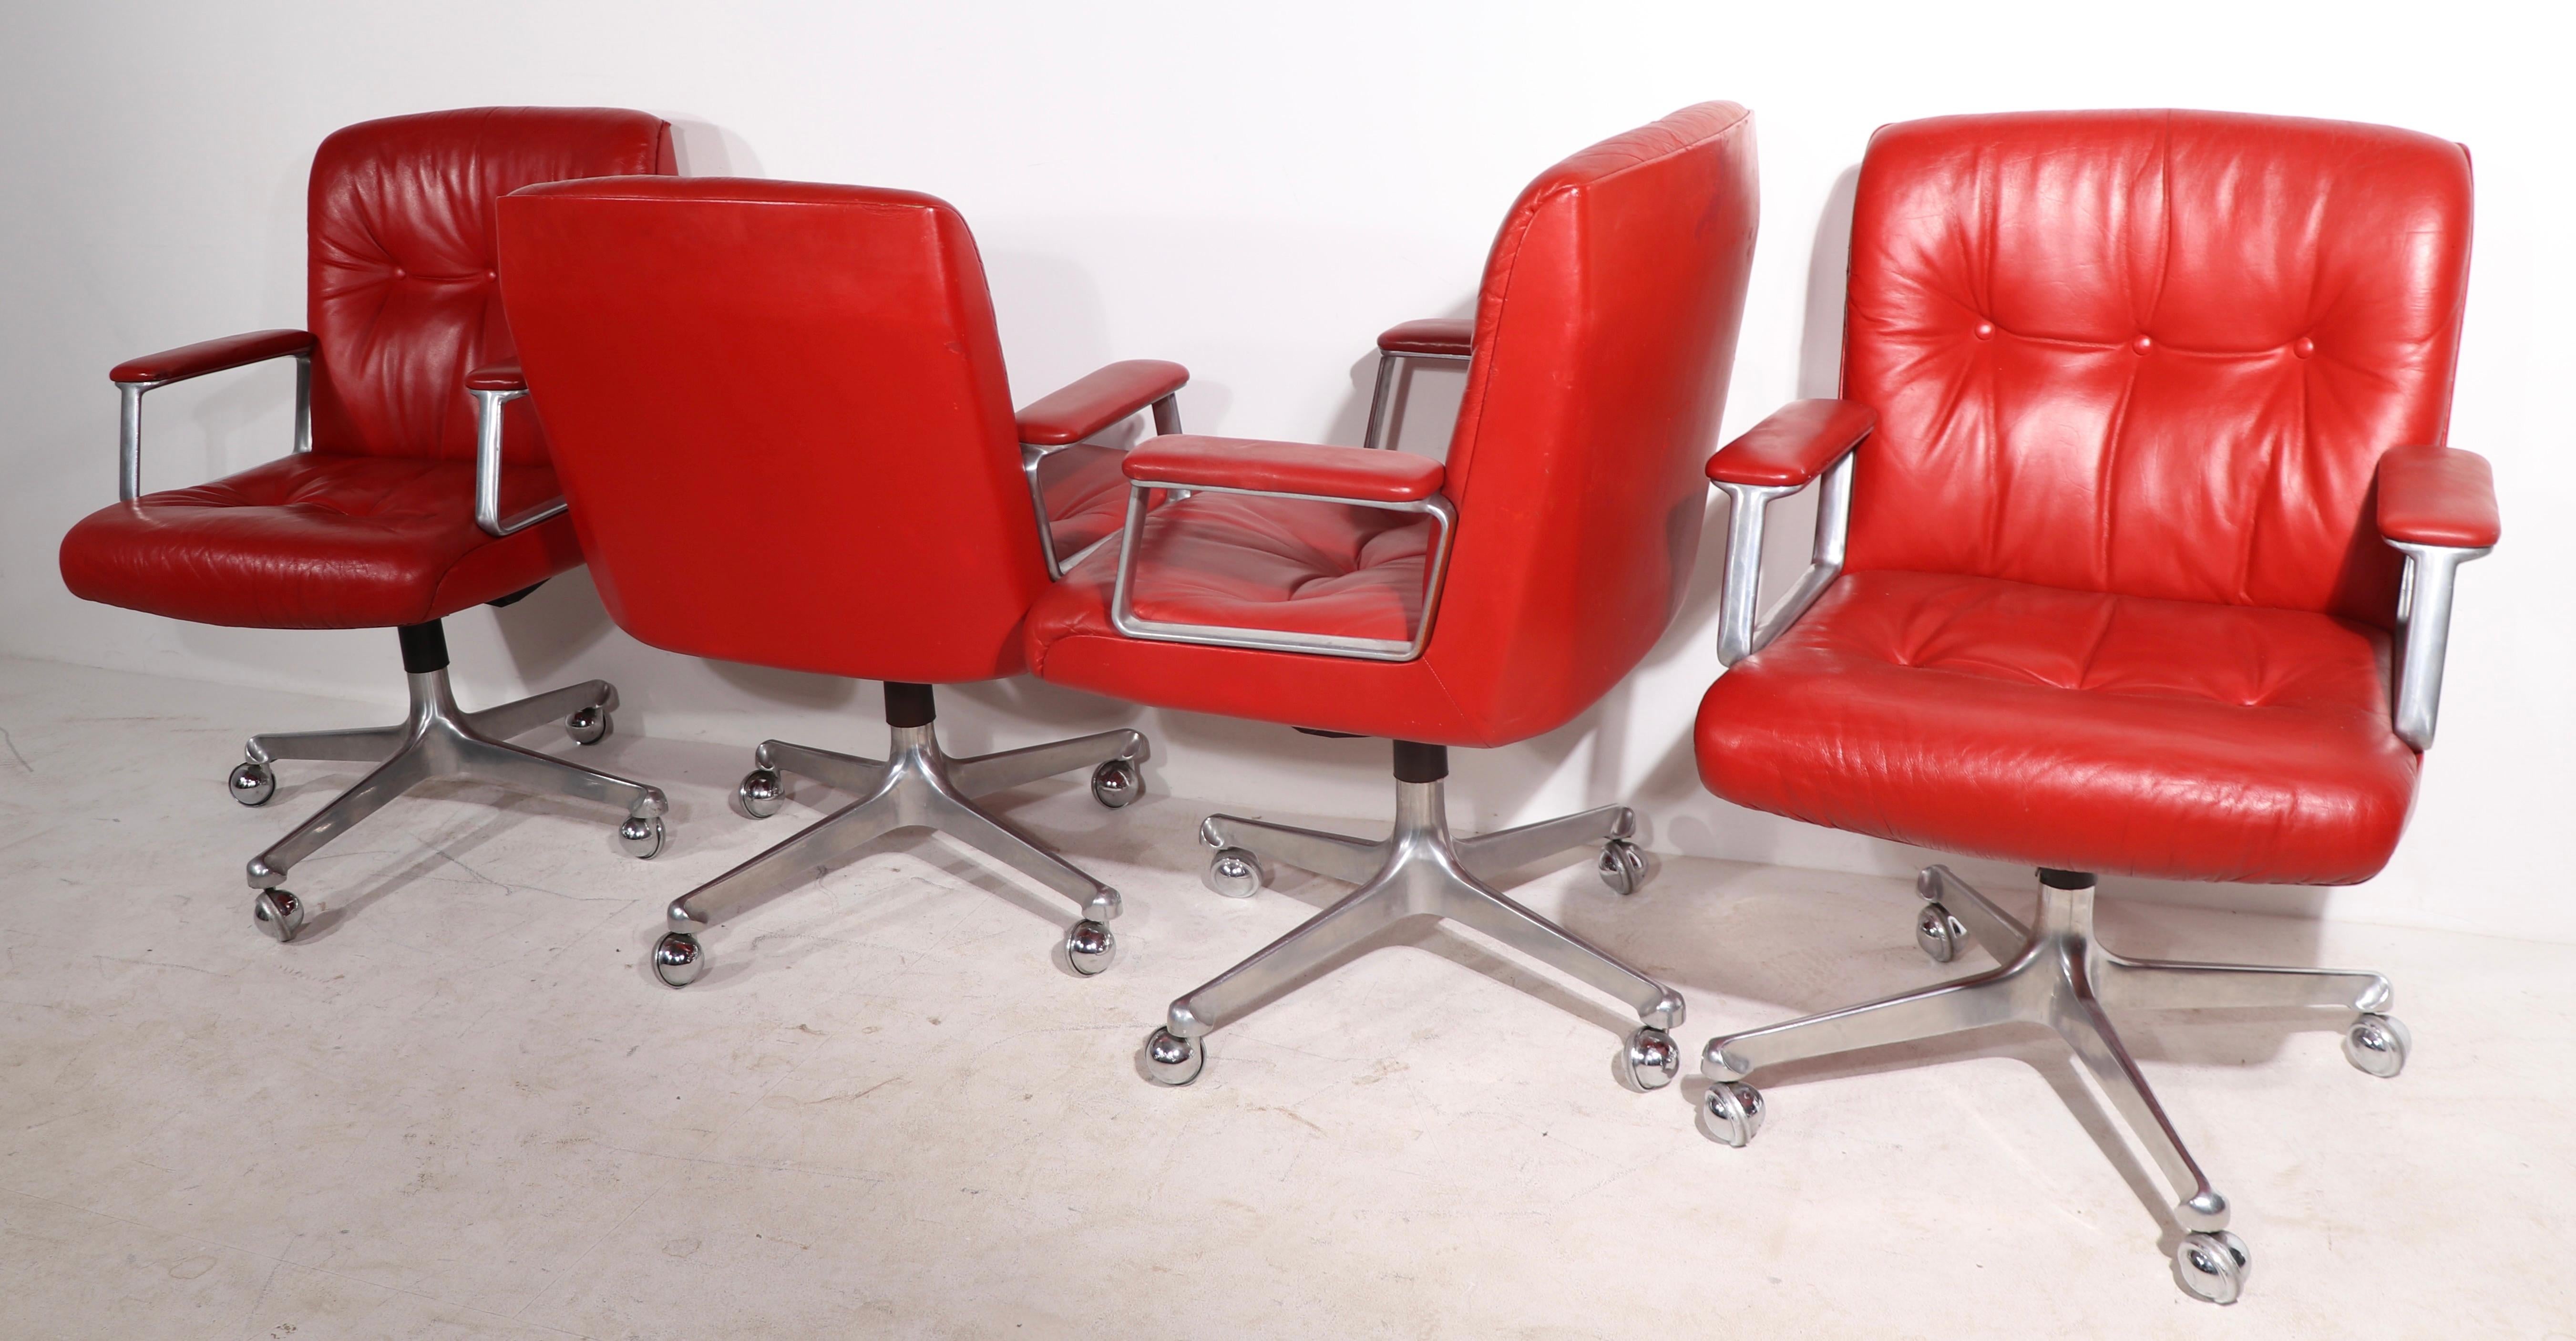 8 P128 Borsani Swivel Desk Chairs in Lipstick Red Leather Upholstery  1